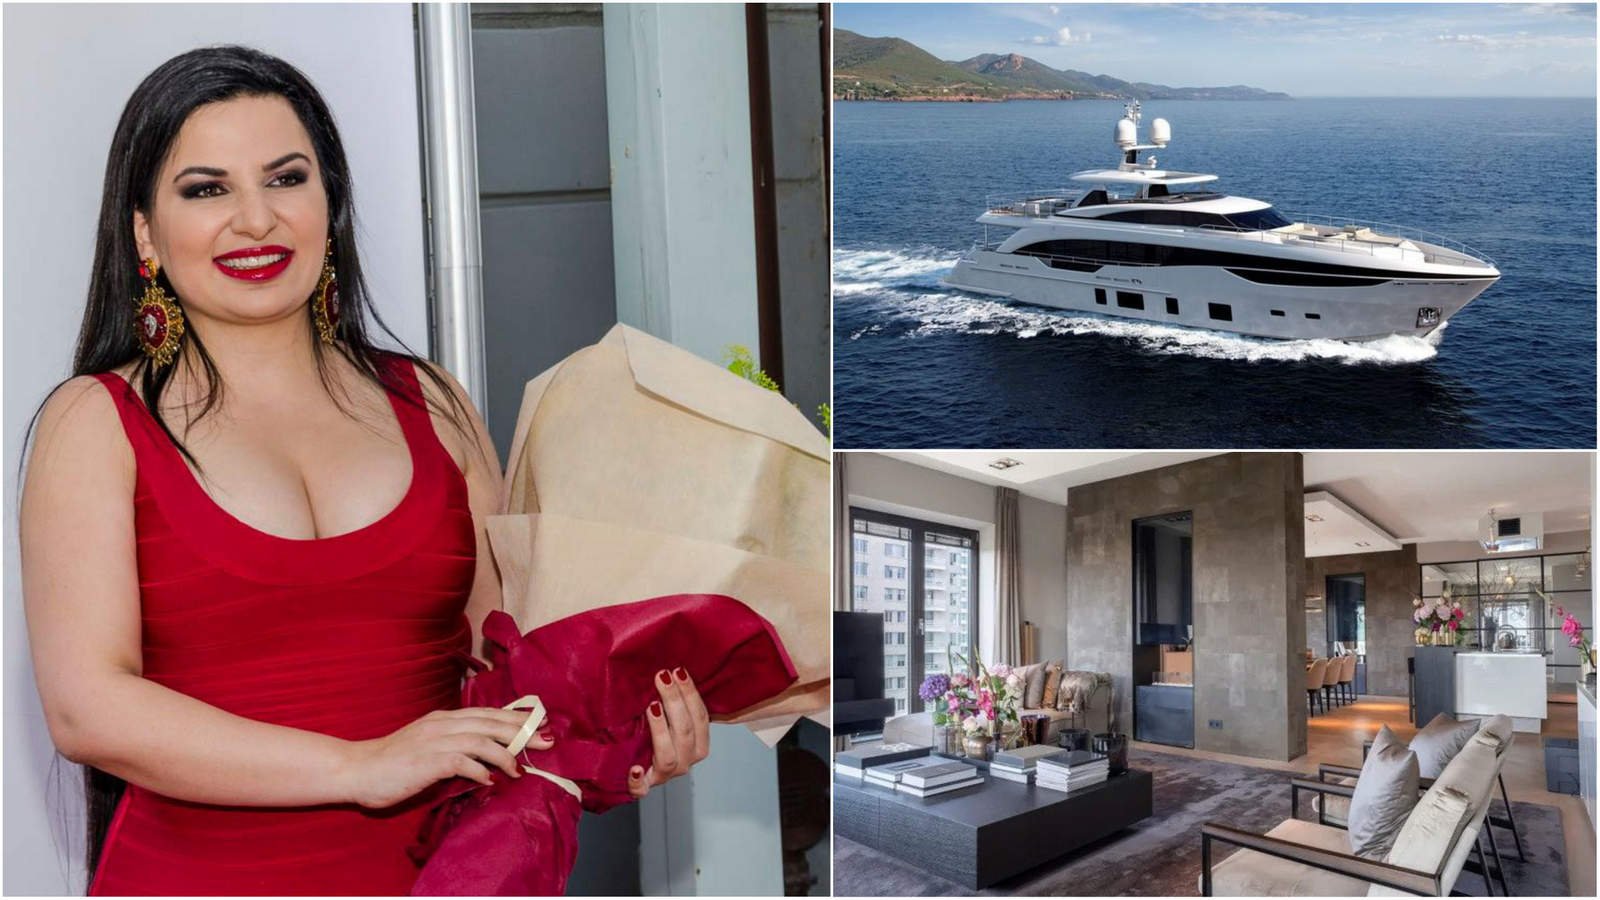 The crazy rich lifestyle of Ruja Ignatova – The glamorous crypto-swindler’s bodyguards would get tired and run out of breath carrying dozens of her shopping bags, her London penthouse had a swimming pool and she relaxed on a 145 feet long luxury yacht.